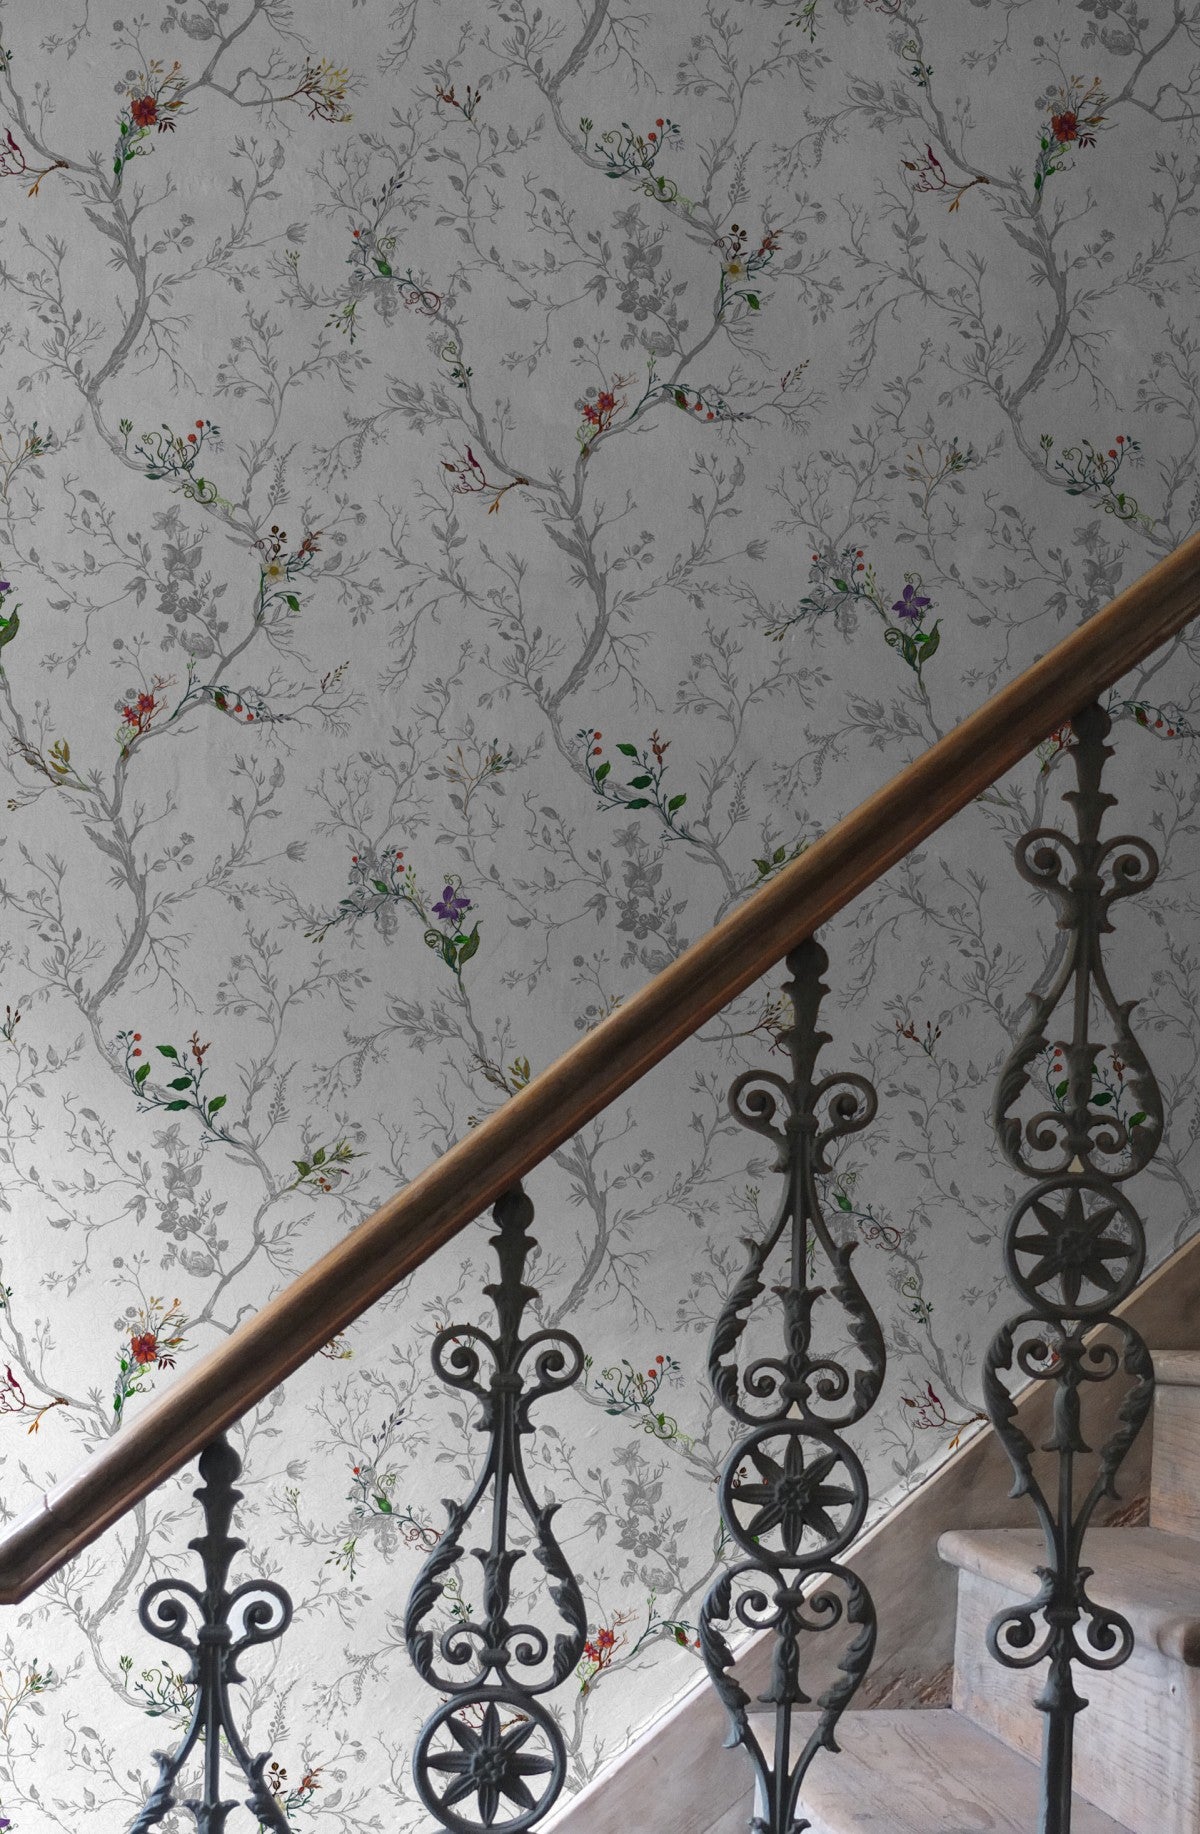 ruskin floral wallpaper by timorous beasties on adorn.house